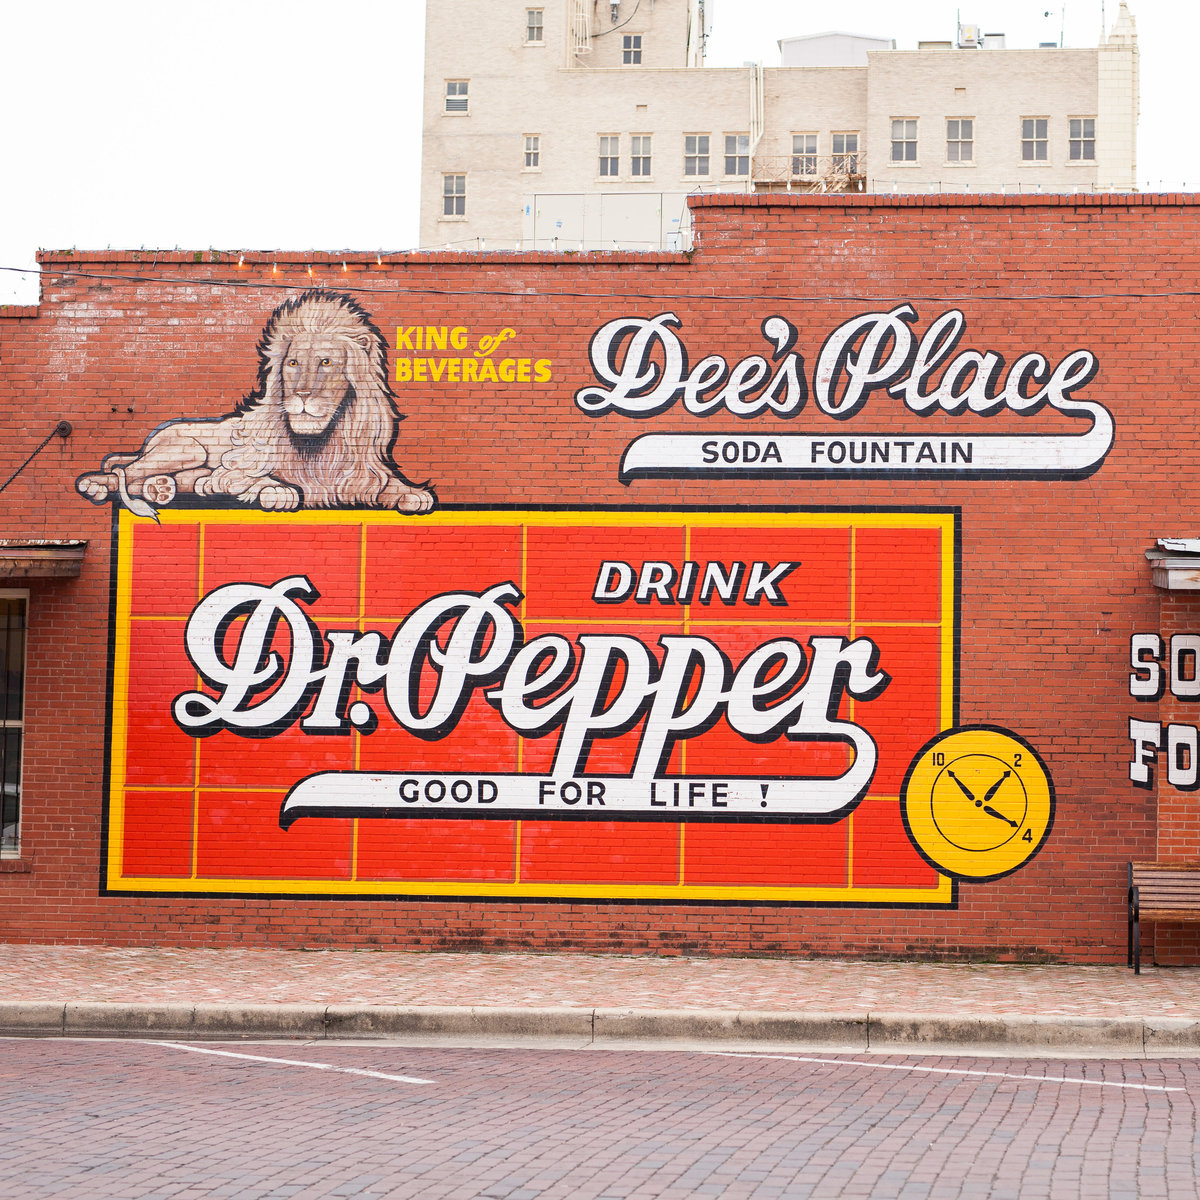 Dr Pepper mural in downtown Corsicana Texas on brick wall